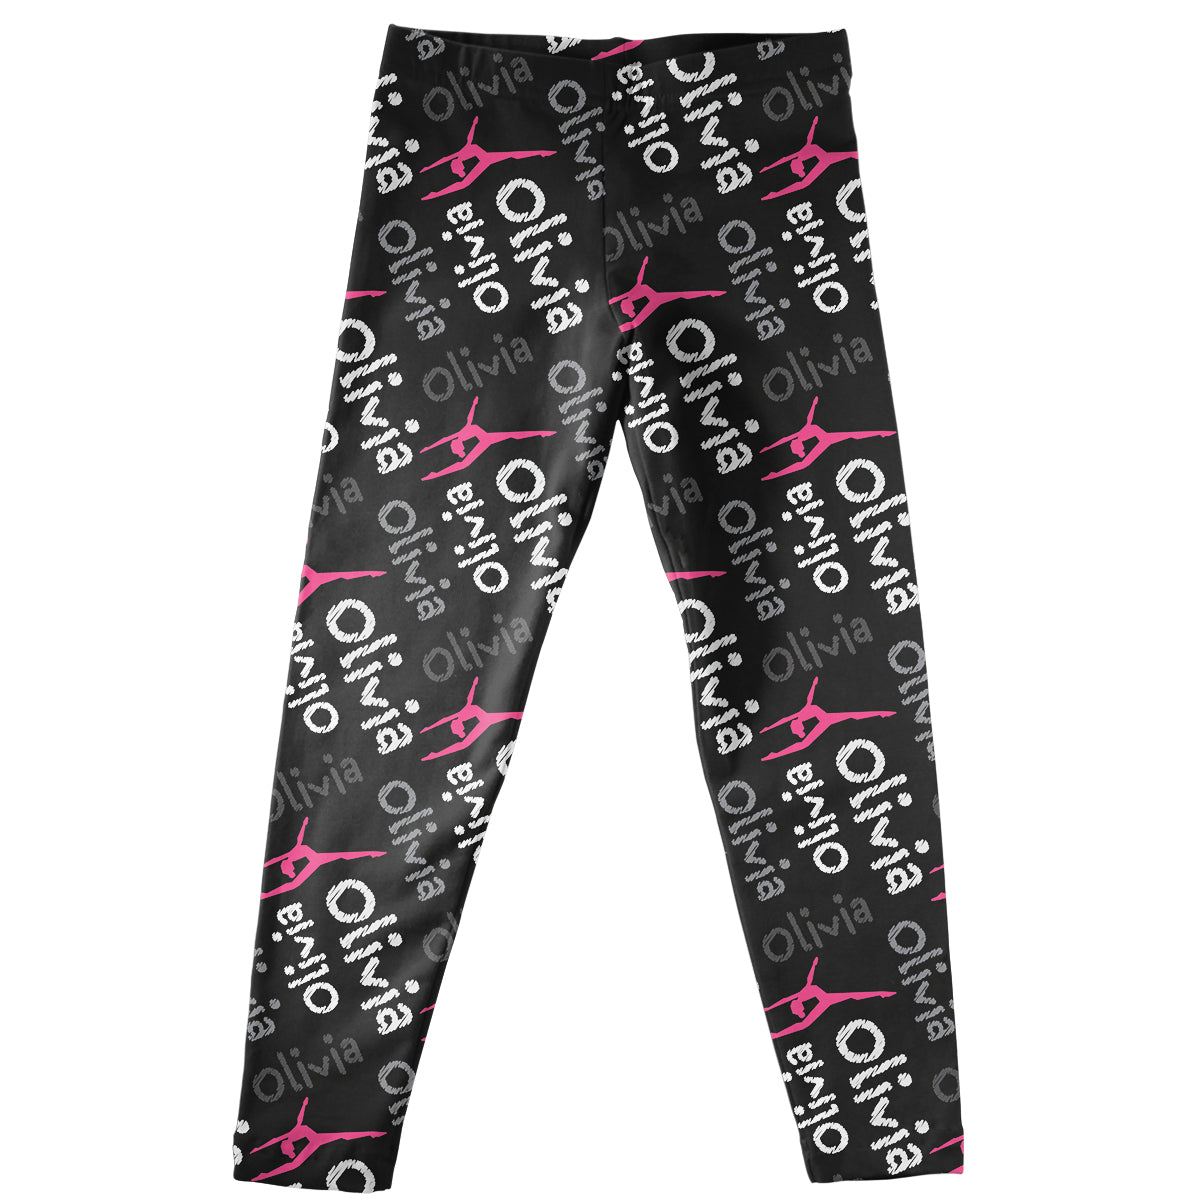 Black and pink dance girls leggings with name - Wimziy&Co.